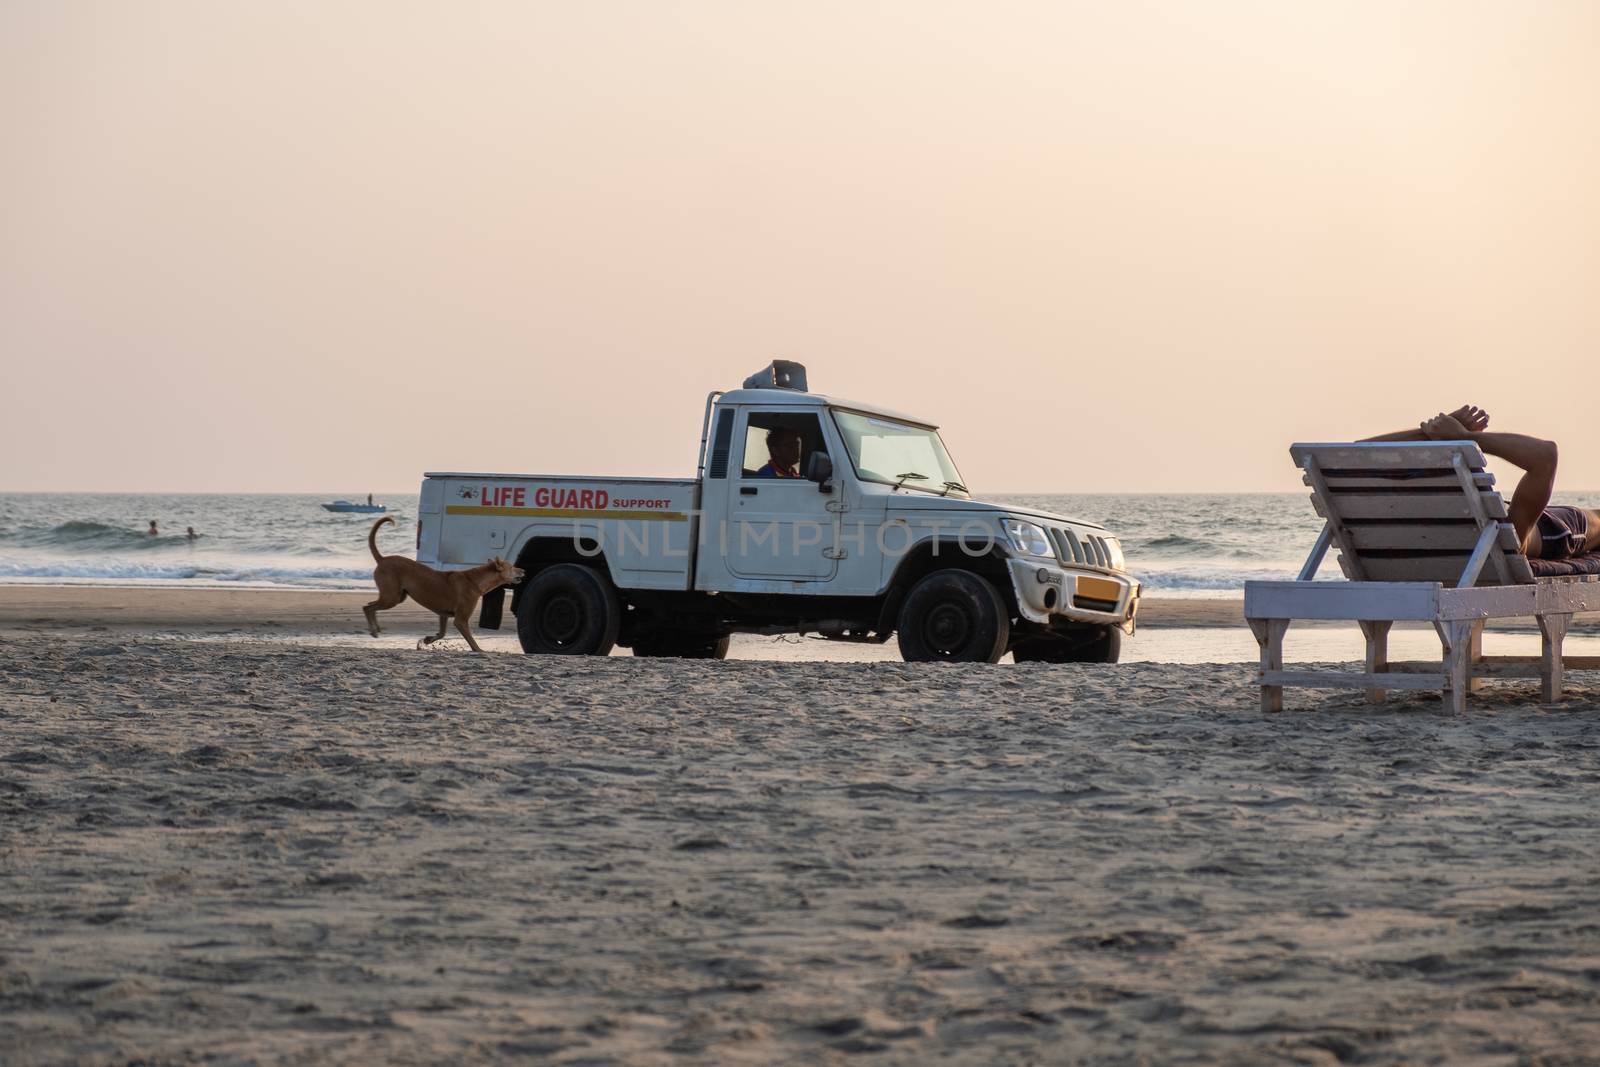 Lifeguards car on the beach by snep_photo